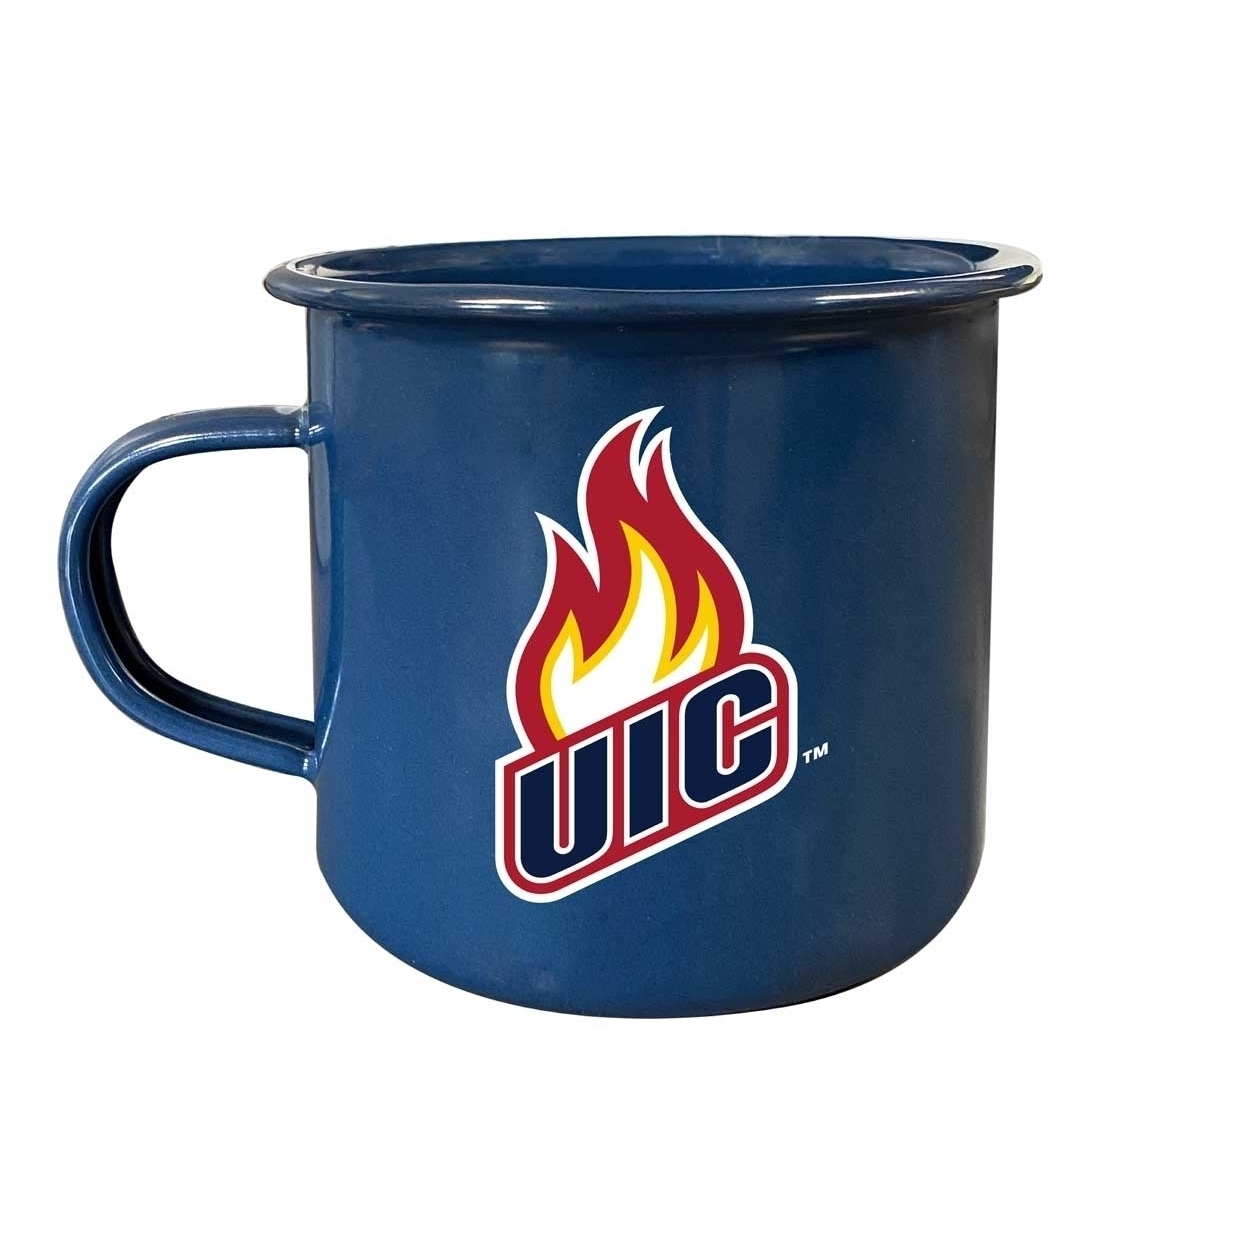 University Of Illinois At Chicago Tin Camper Coffee Mug - Choose Your Color - Navy